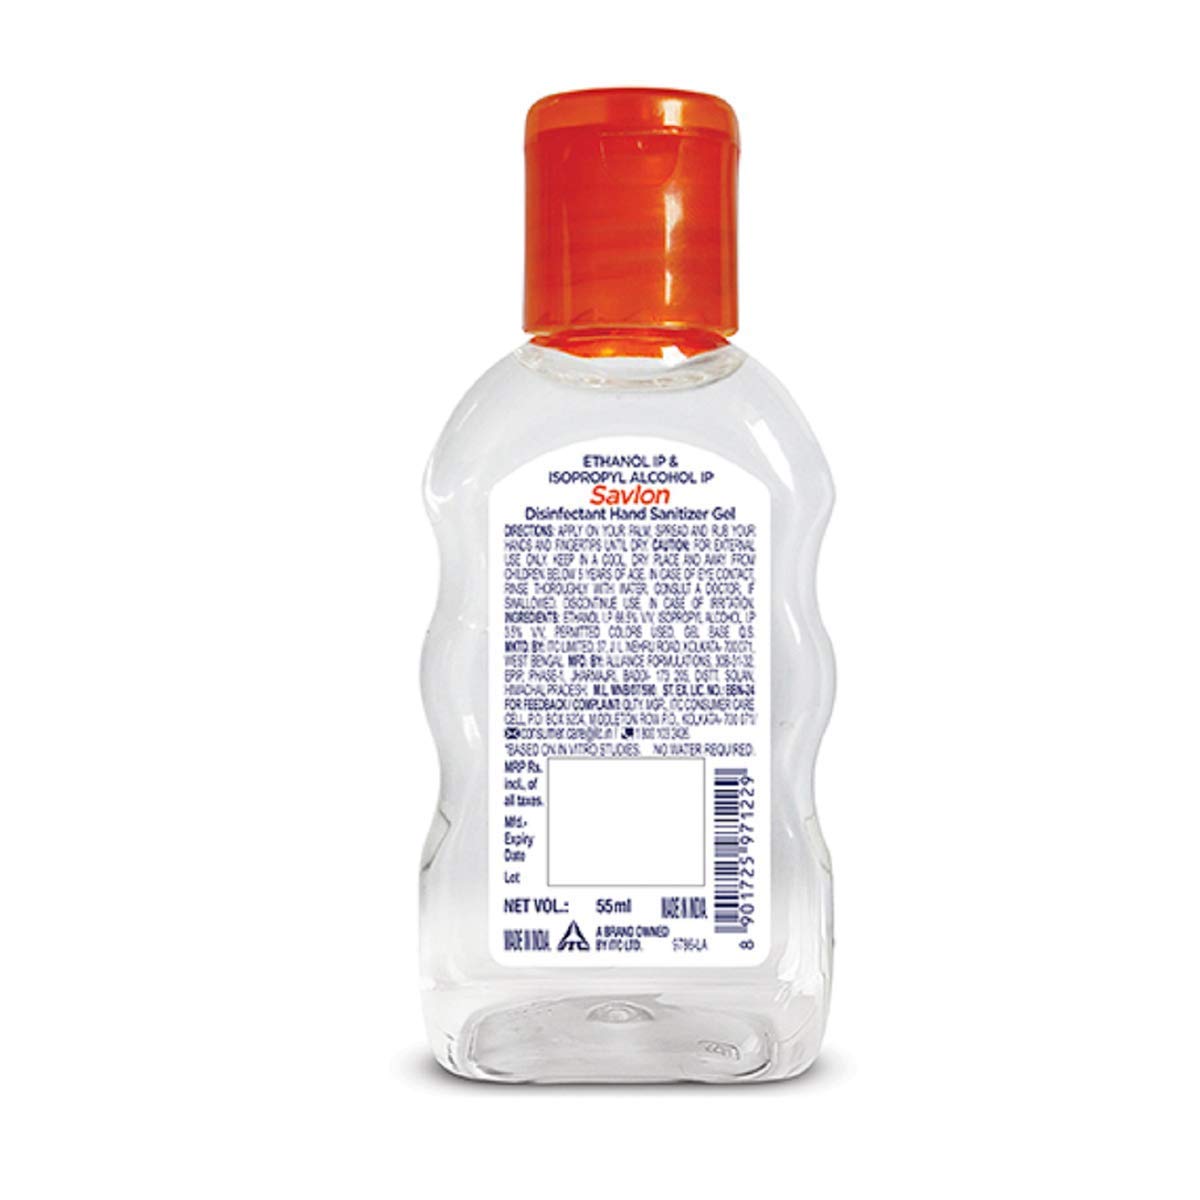 ITC cuts Savlon Sanitiser ( 55 ml) price to Rs 27 from Rs 77